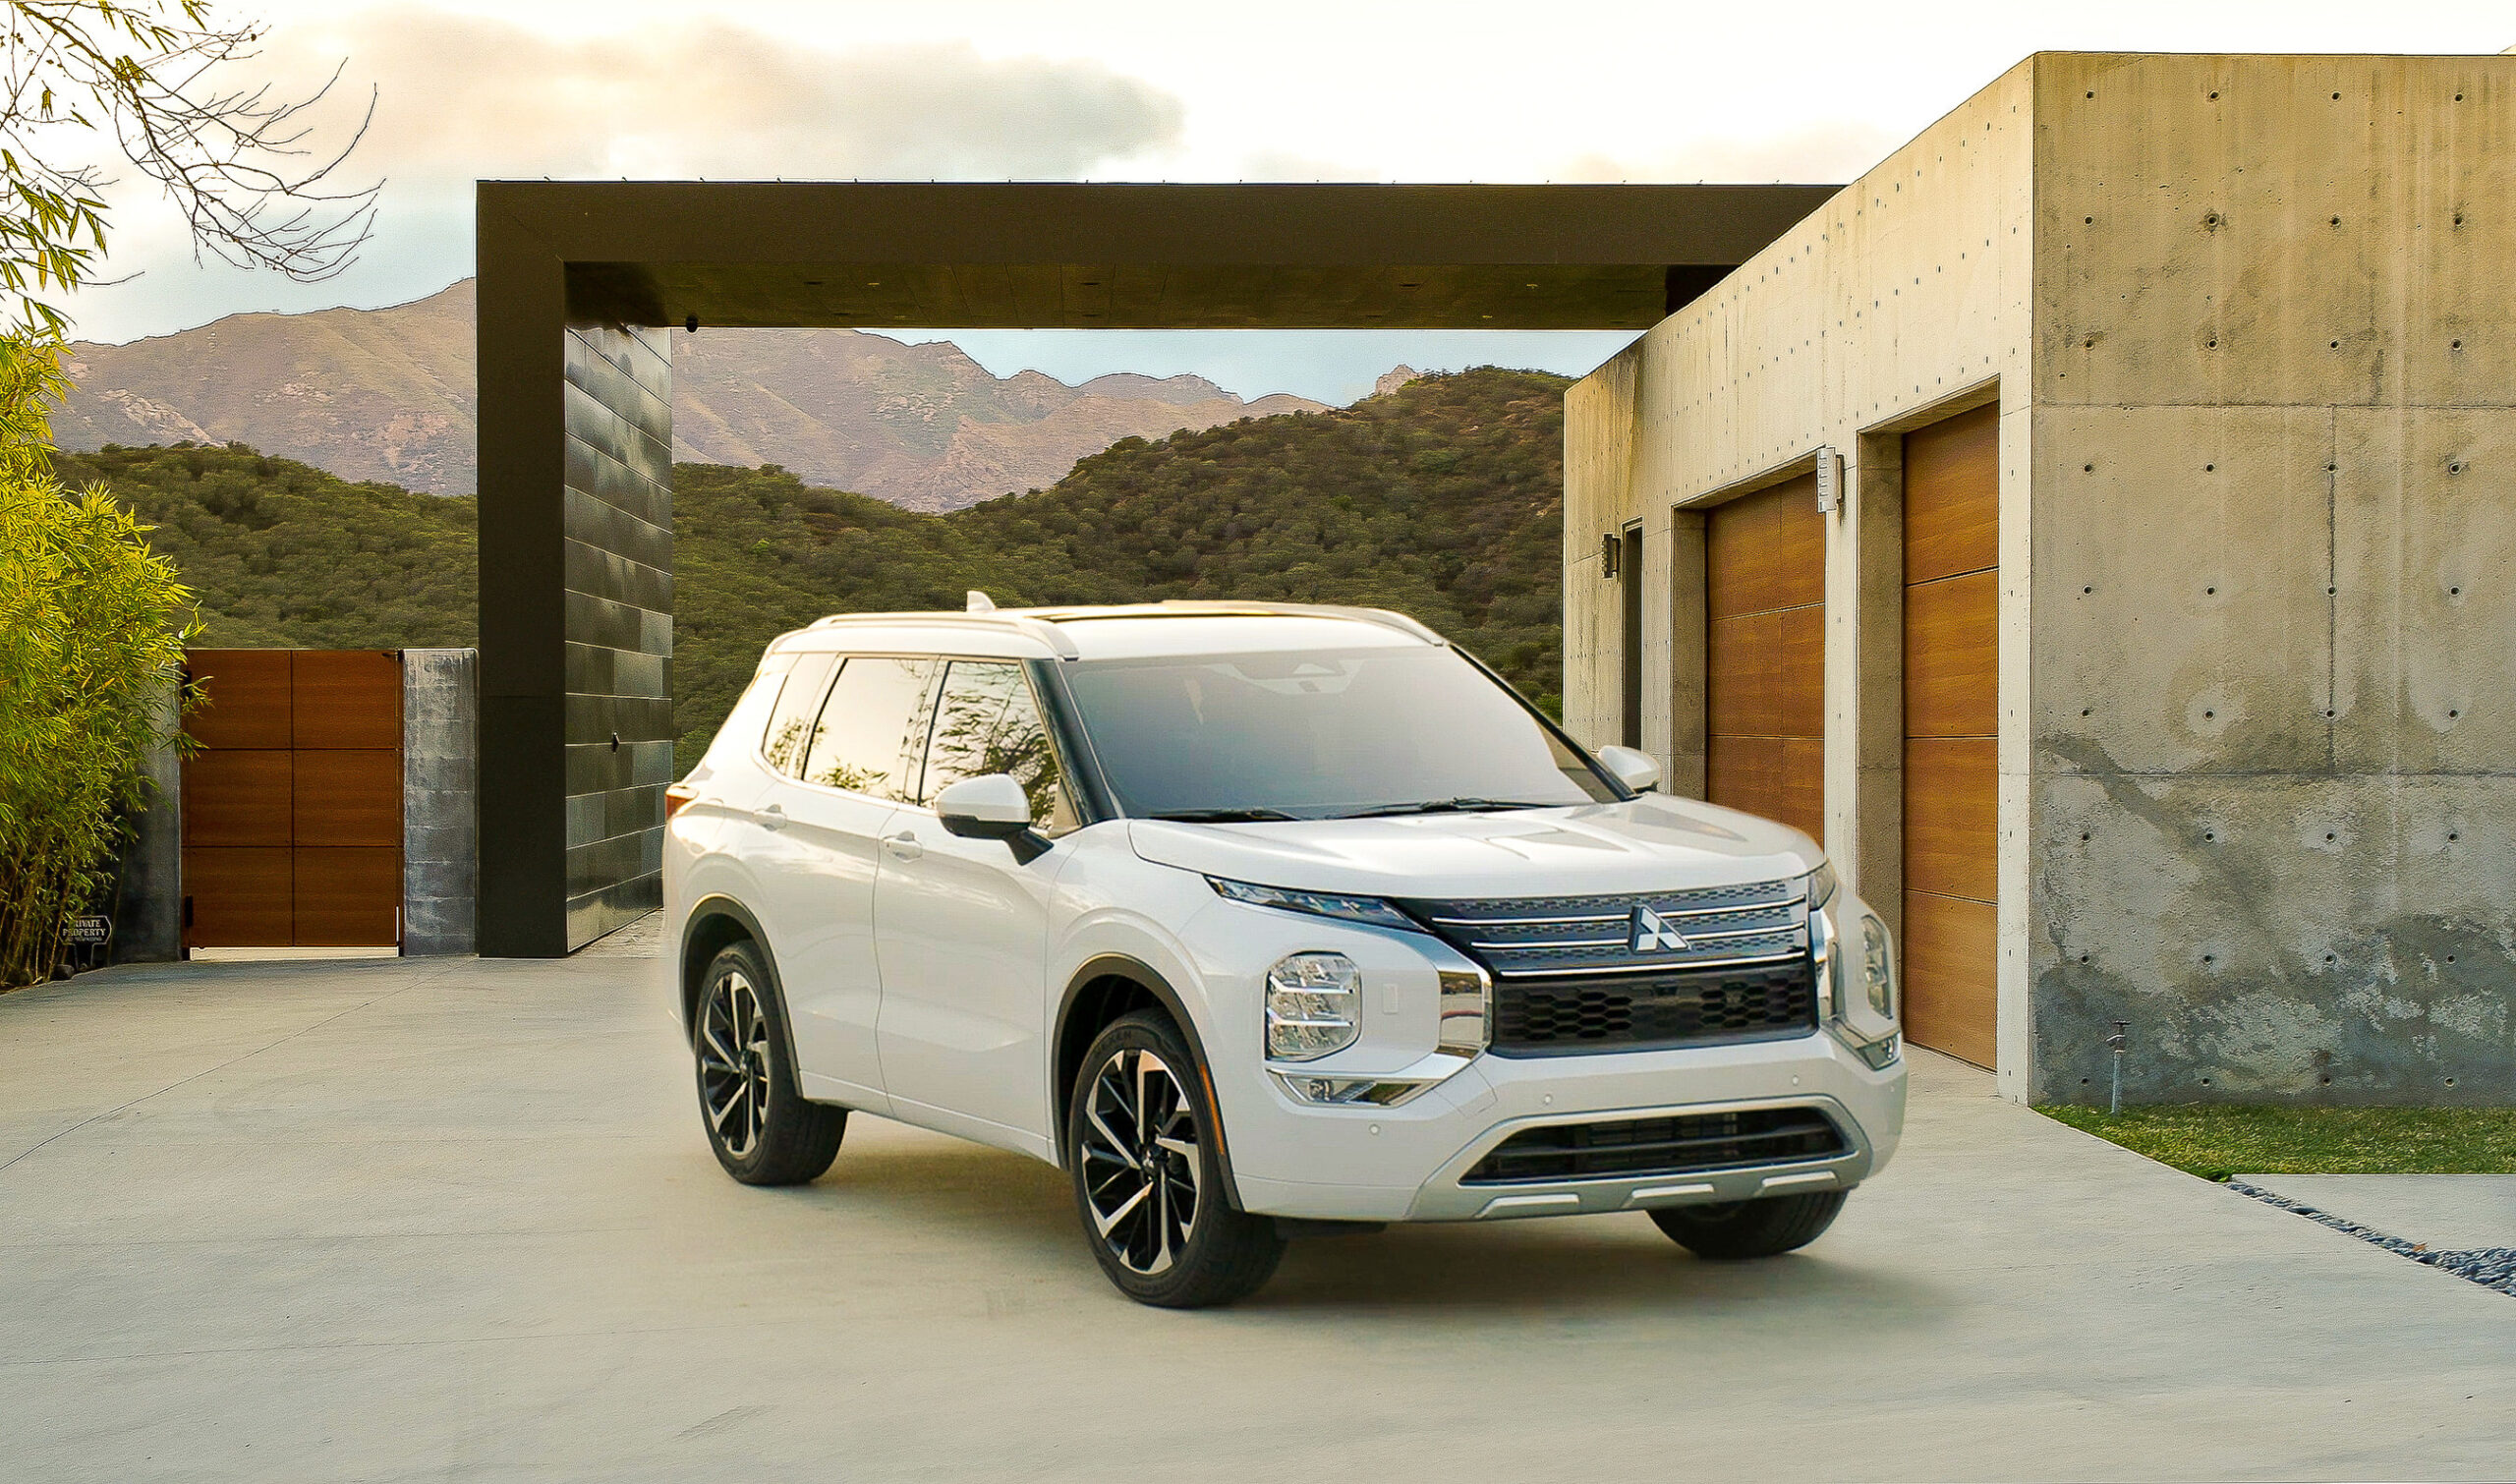 Mitsubishi Motors Introduces All-New 2022 Outlander In World’s First Amazon Live Reveal Event